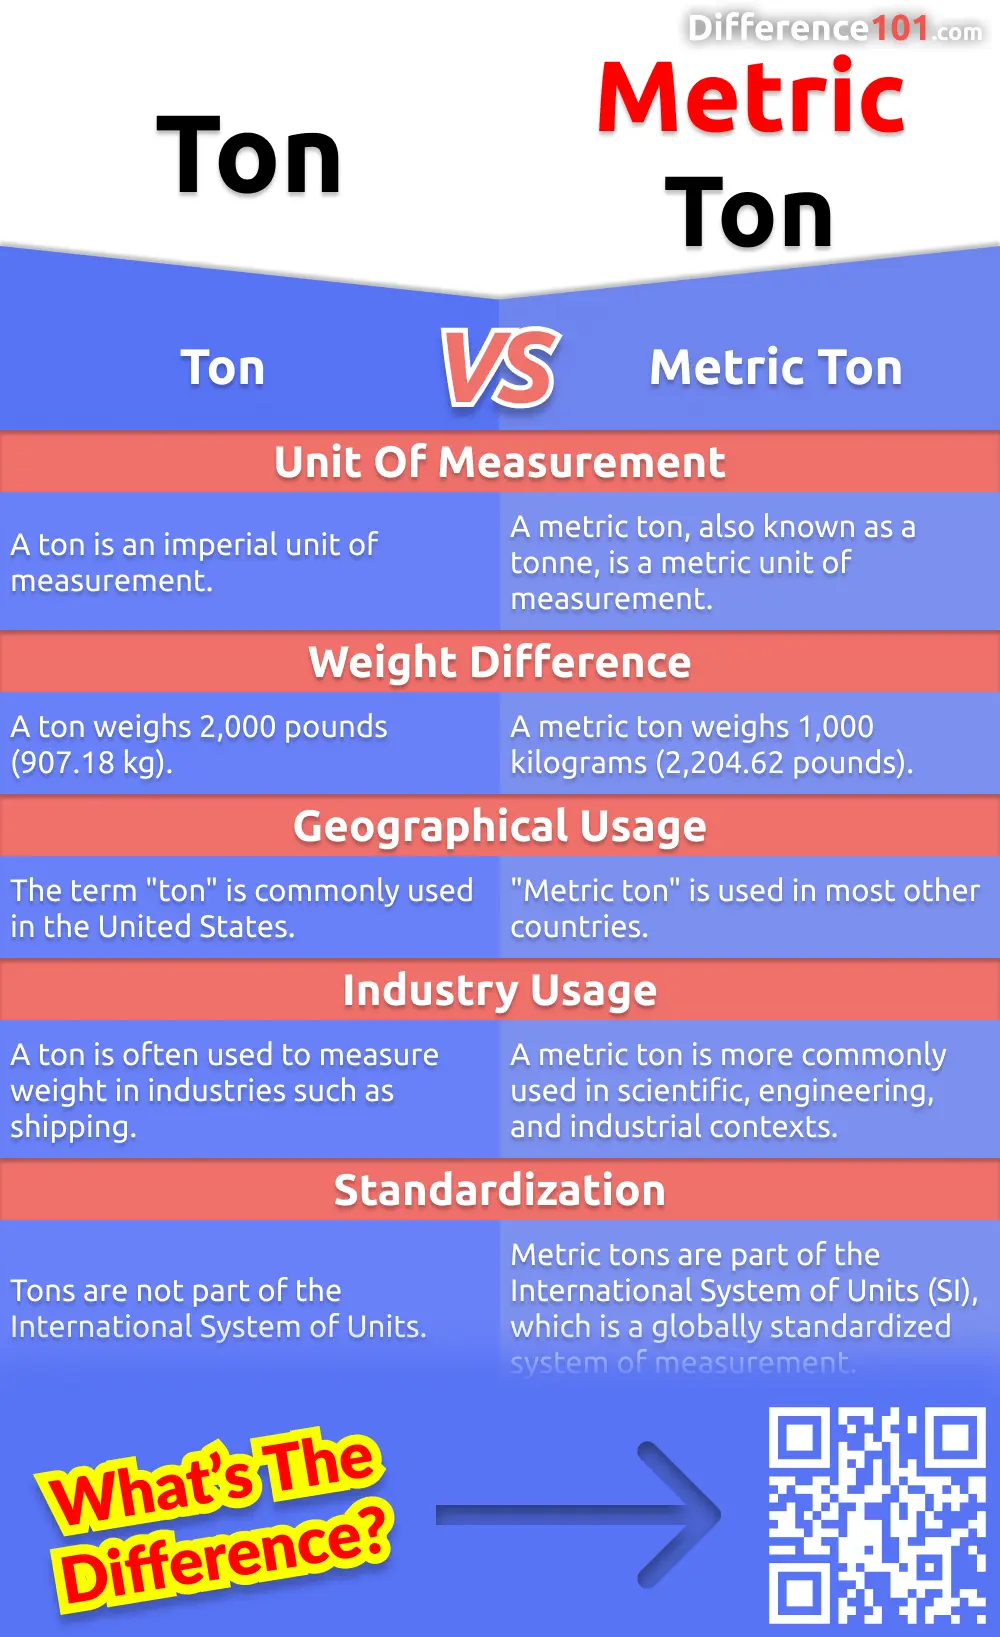 Ton Metric Ton: 5 Key Differences, Pros & Cons, Similarities | Difference 101